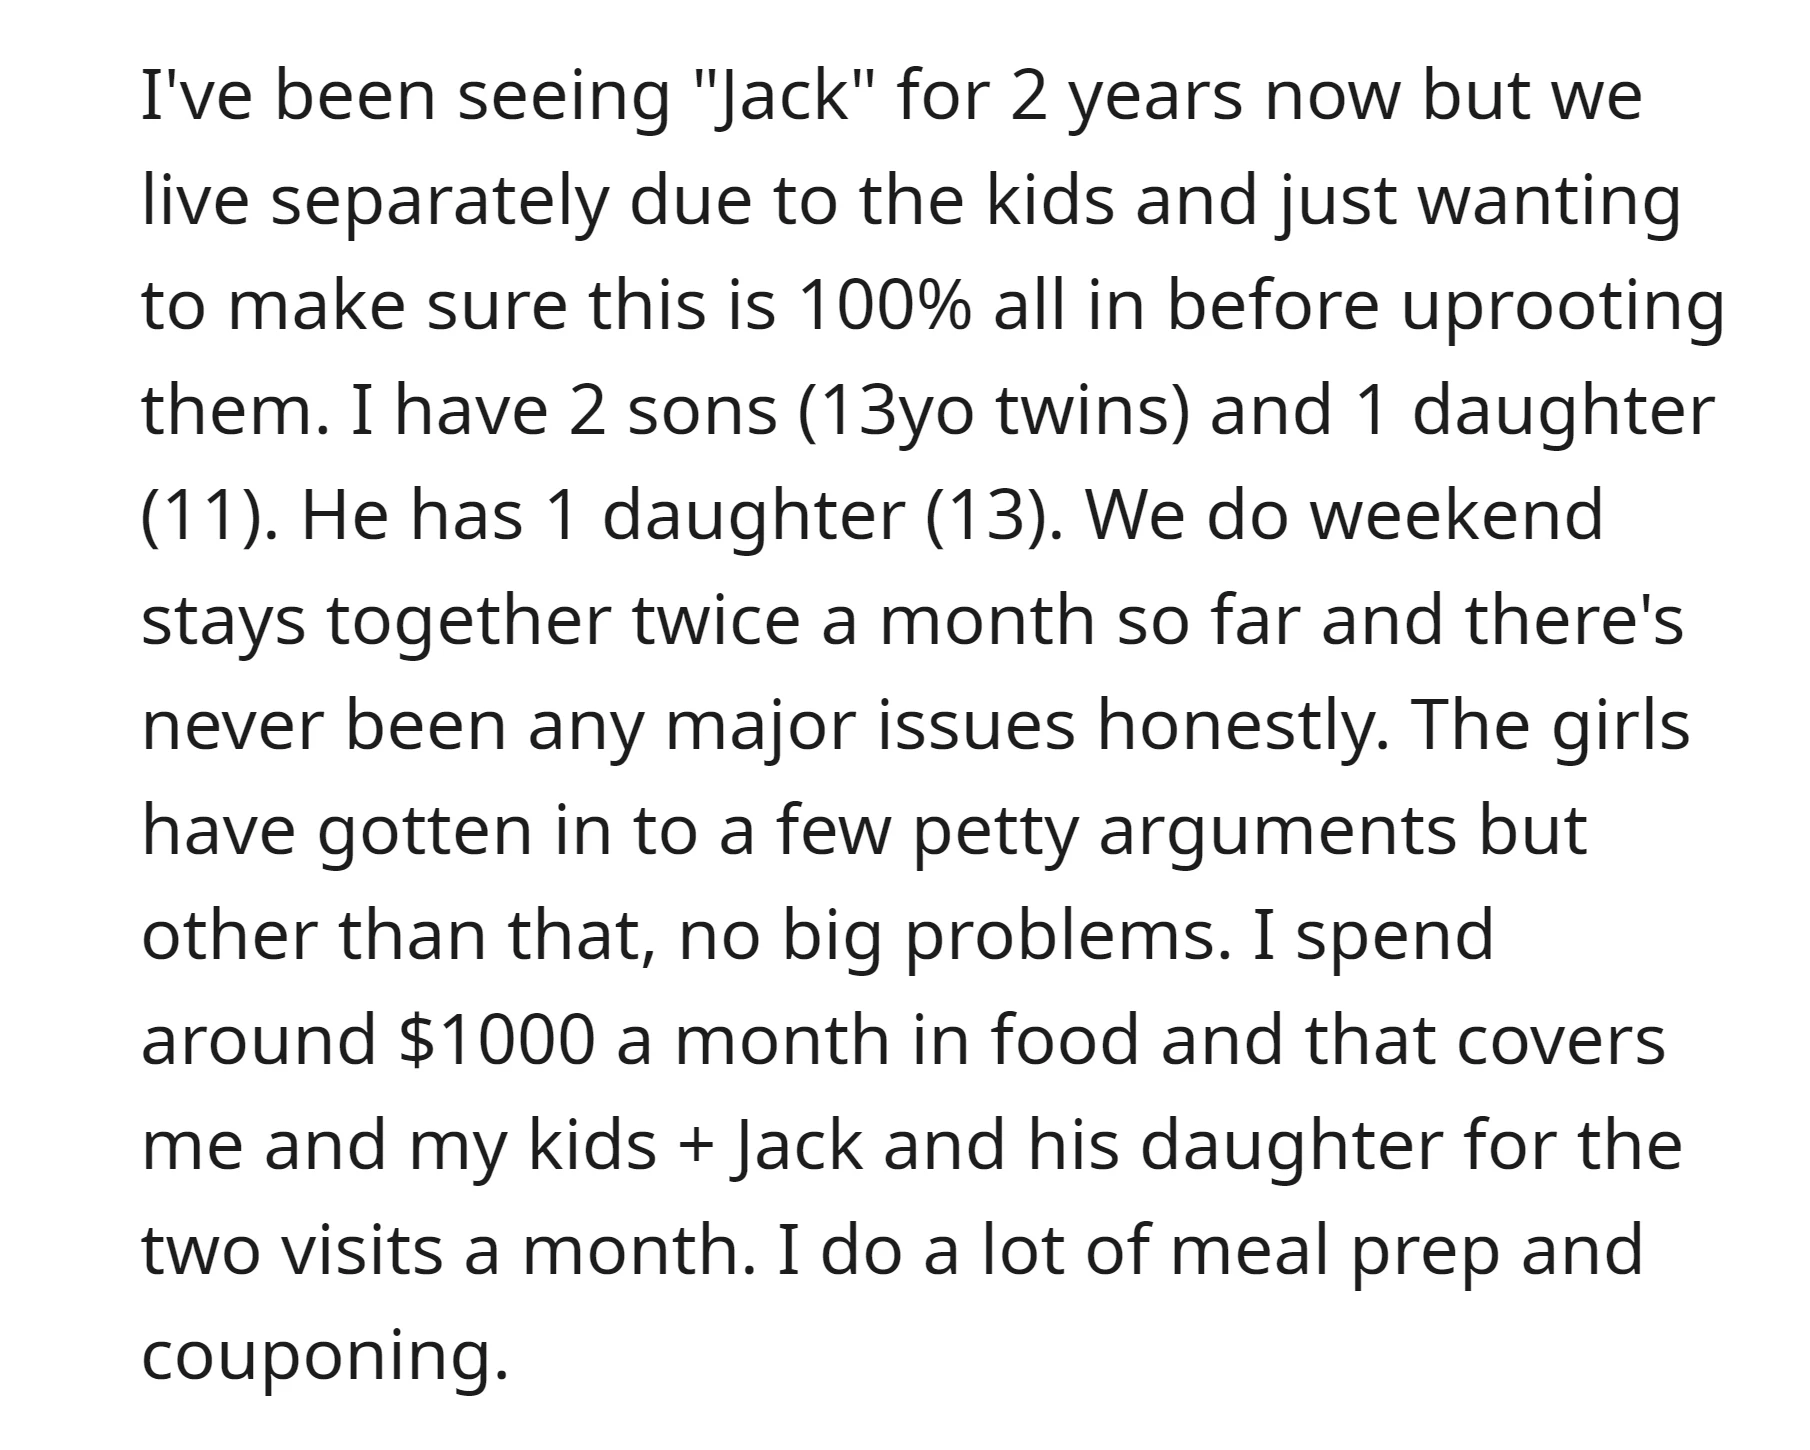 OP spent around $1000 monthly in food for her, her kids, Jack and his kids